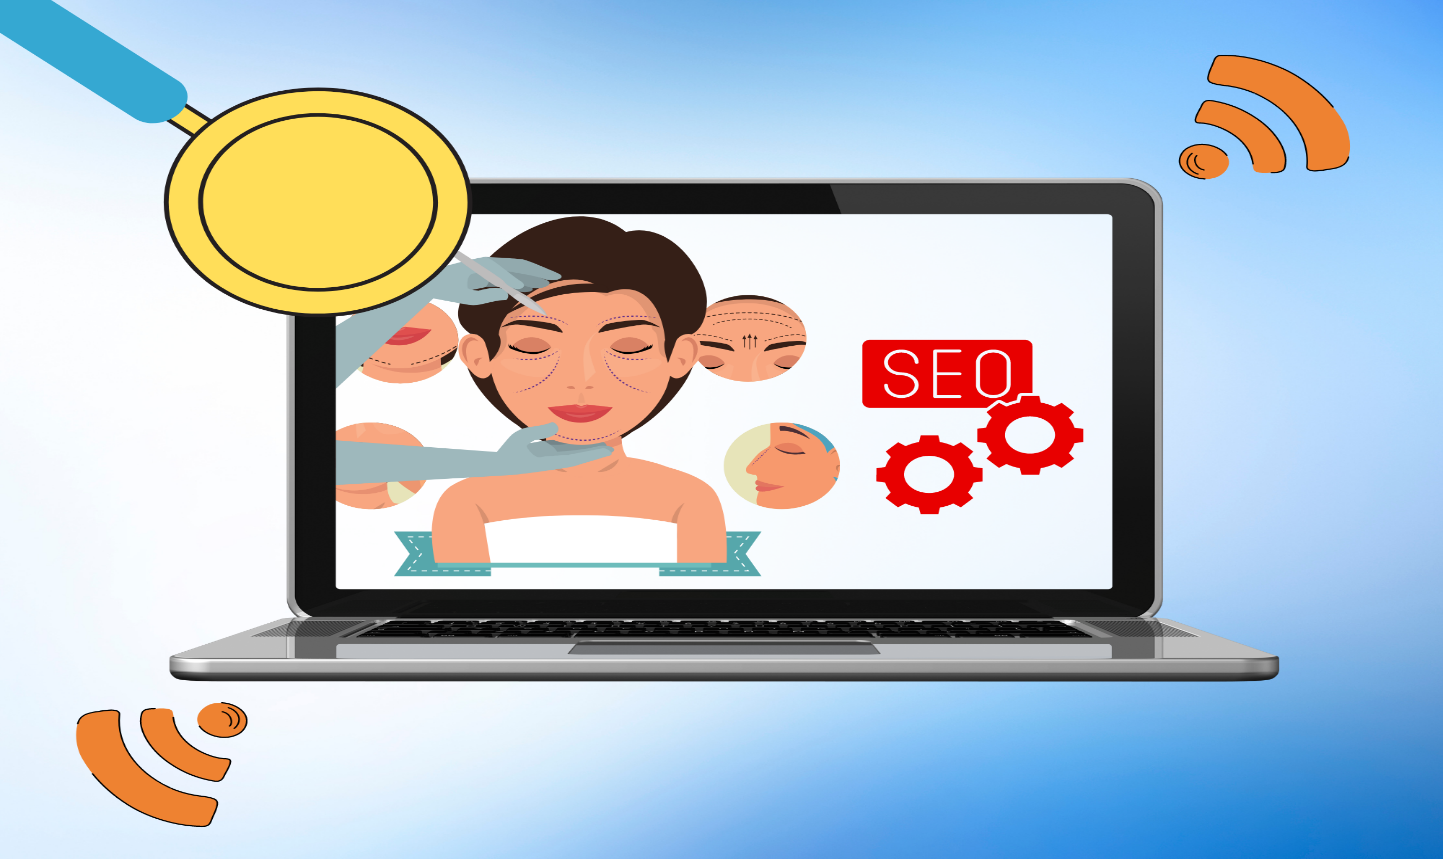 Plastic Surgery SEO Guide | Best SEO Guide for Plastic Surgeons in 2022